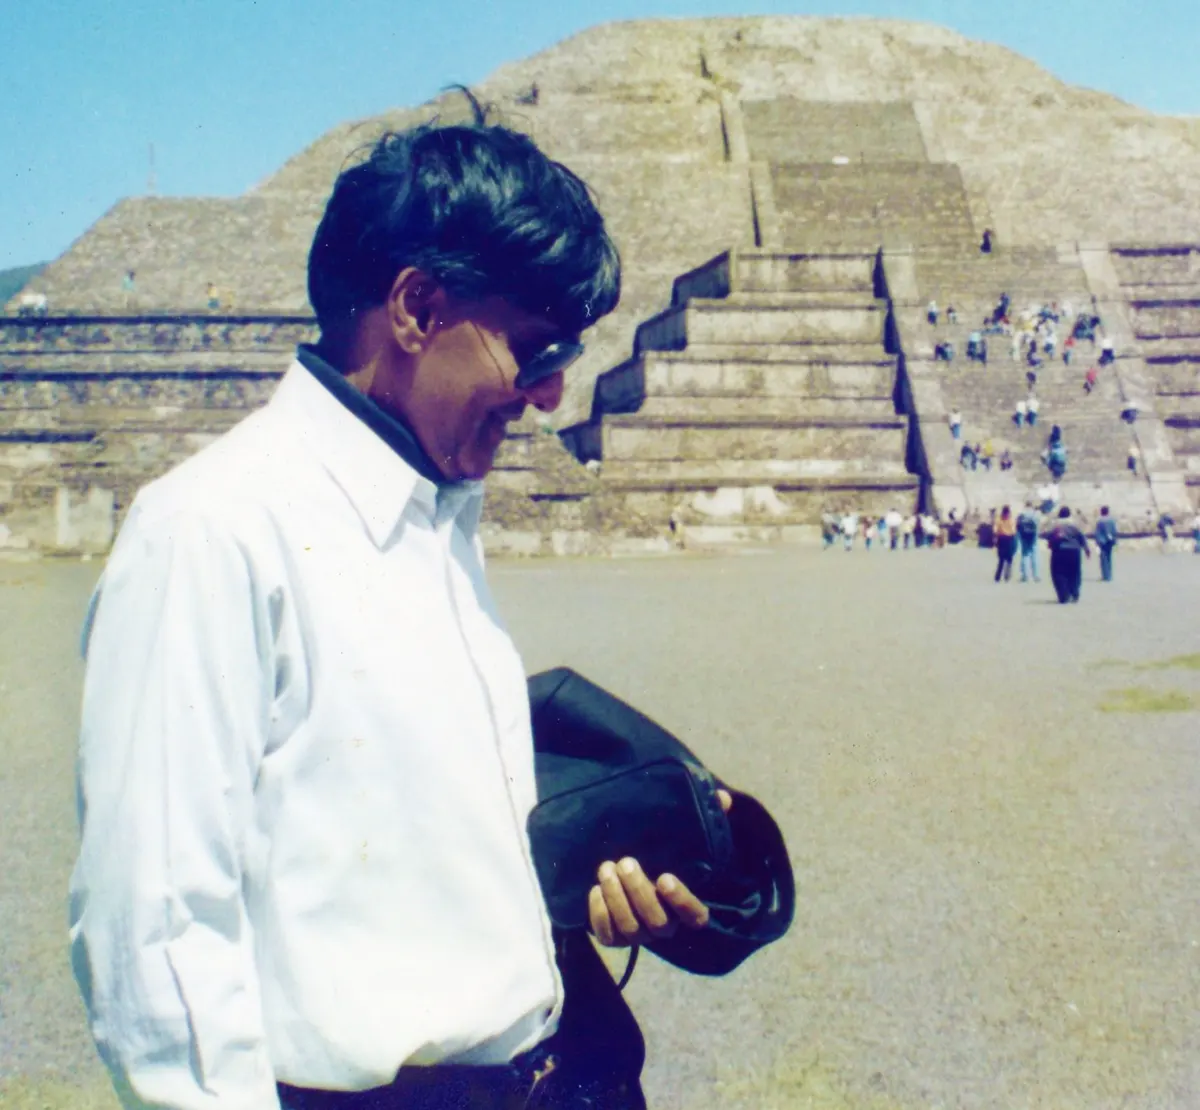 2003, Age 58. Mexican pyramid